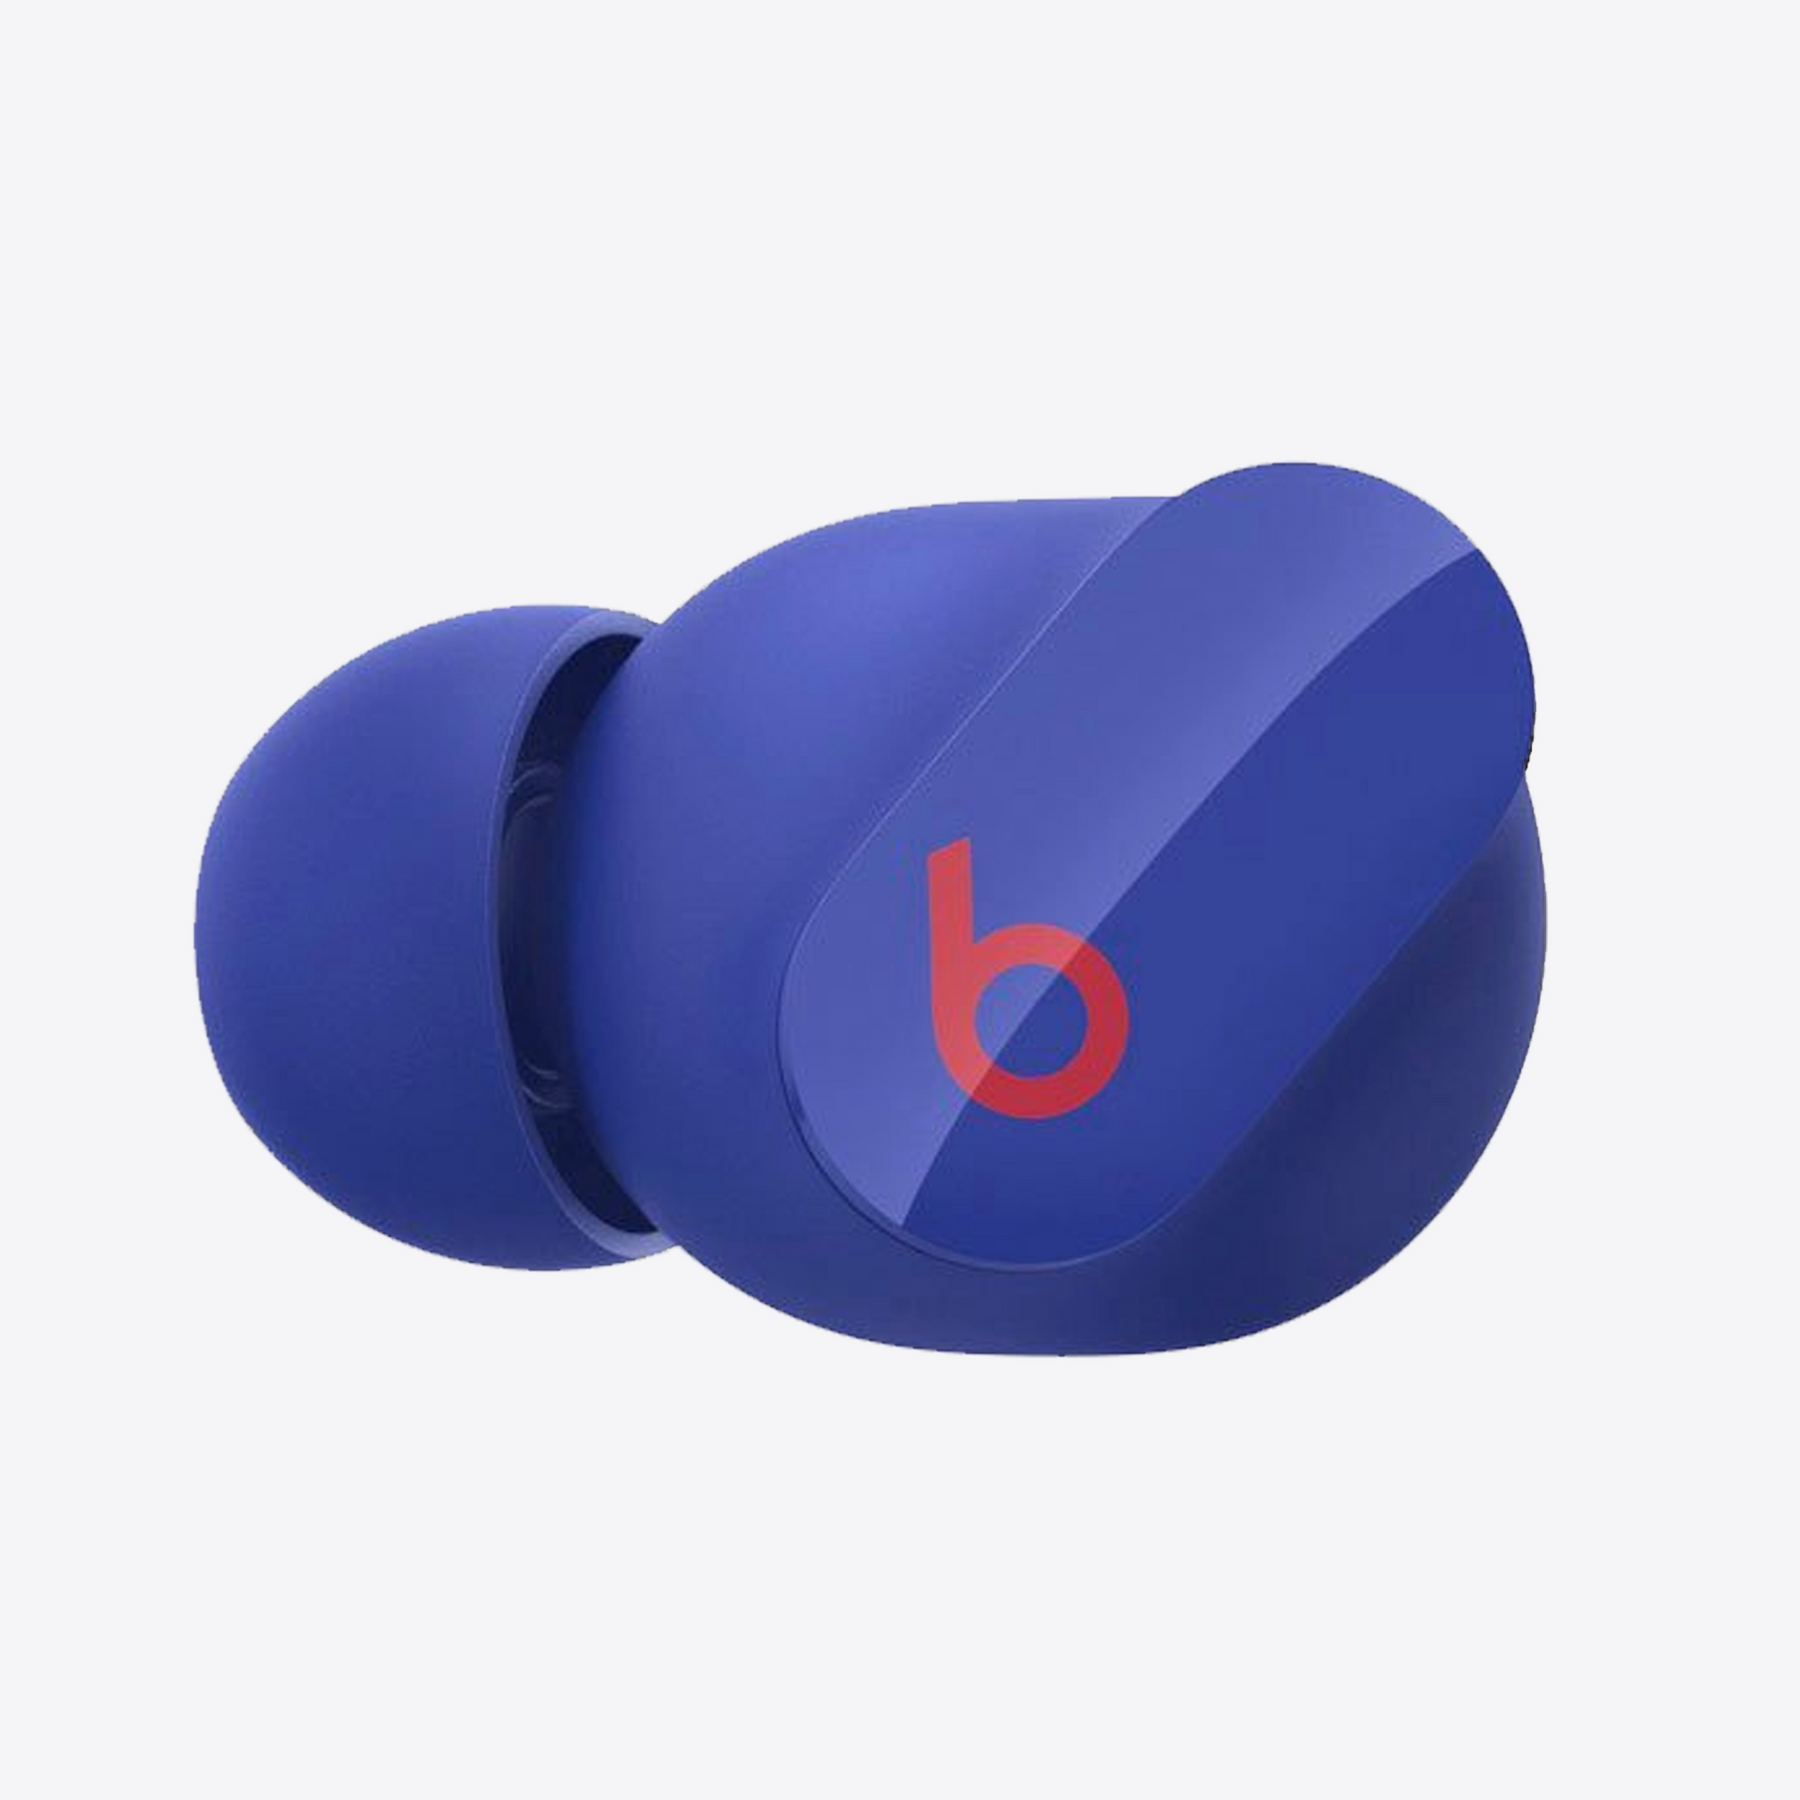 Original Beats Studio Buds Wireless LEFT SIDE or Charging Case Replacement